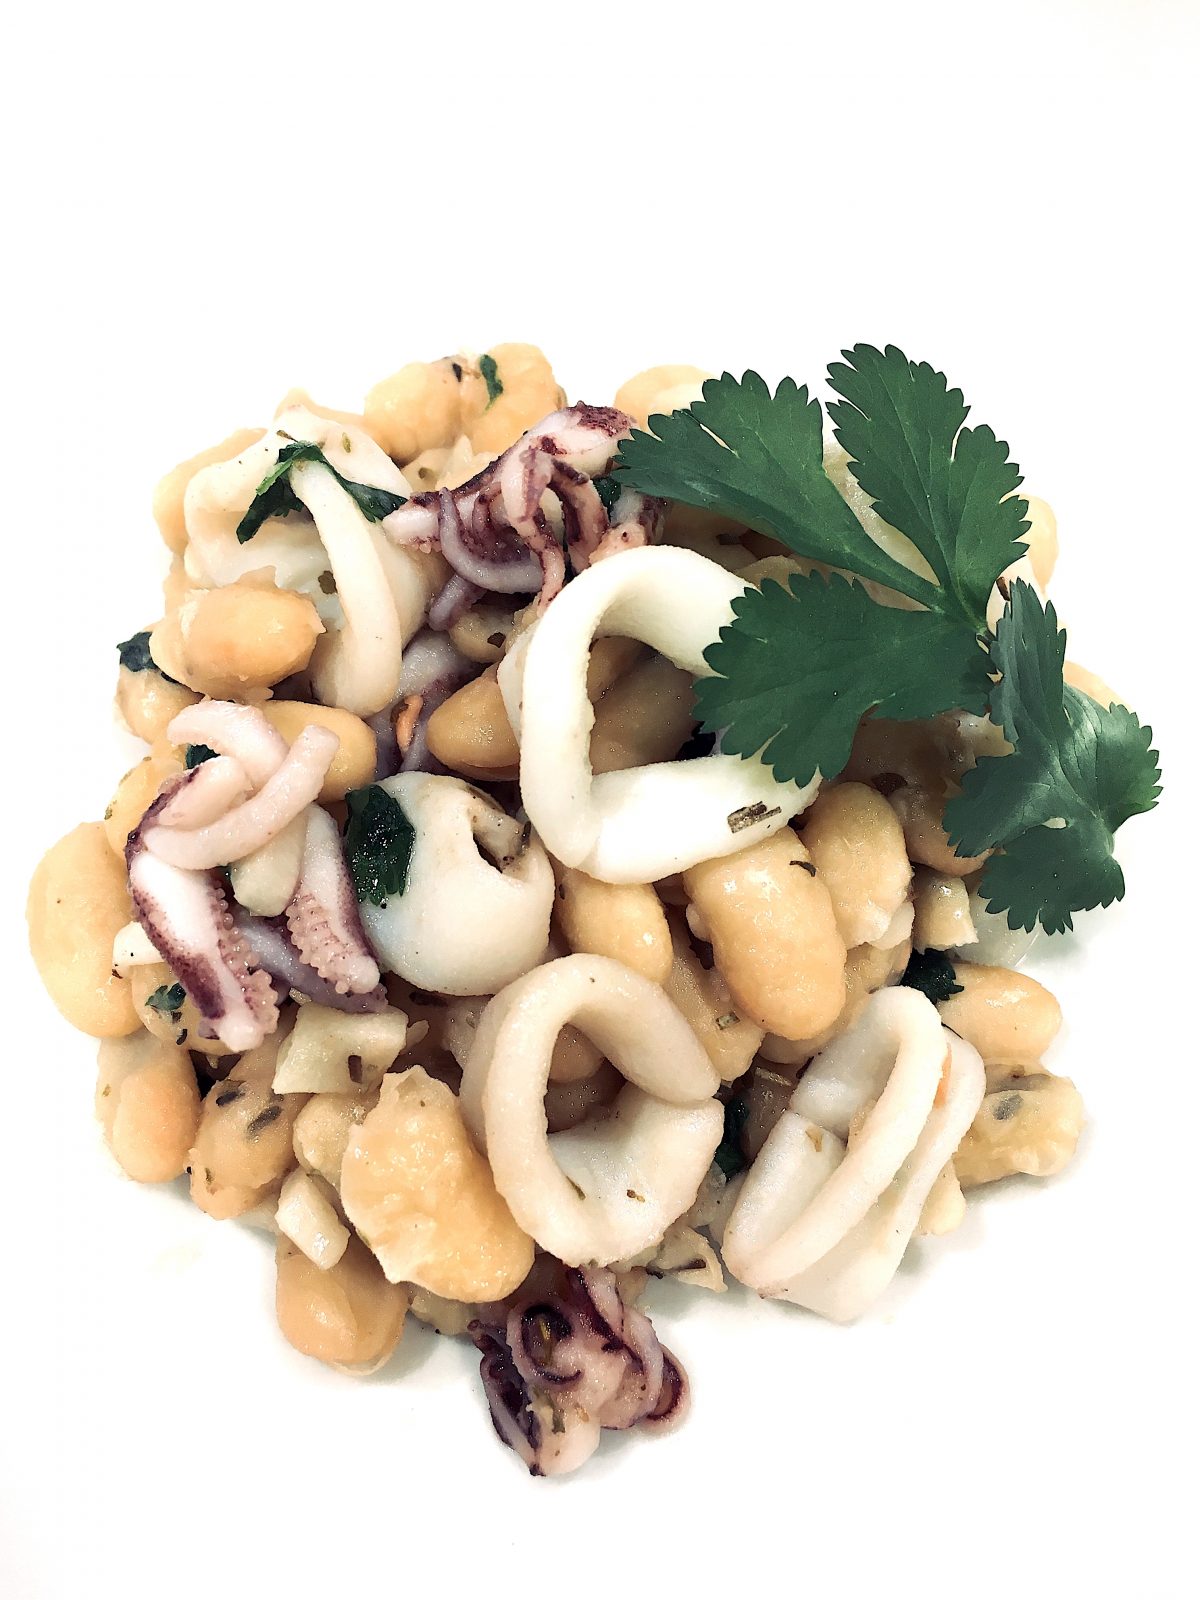 A Quick and Easy Spanish Seafood Dish – Calamari and White Beans